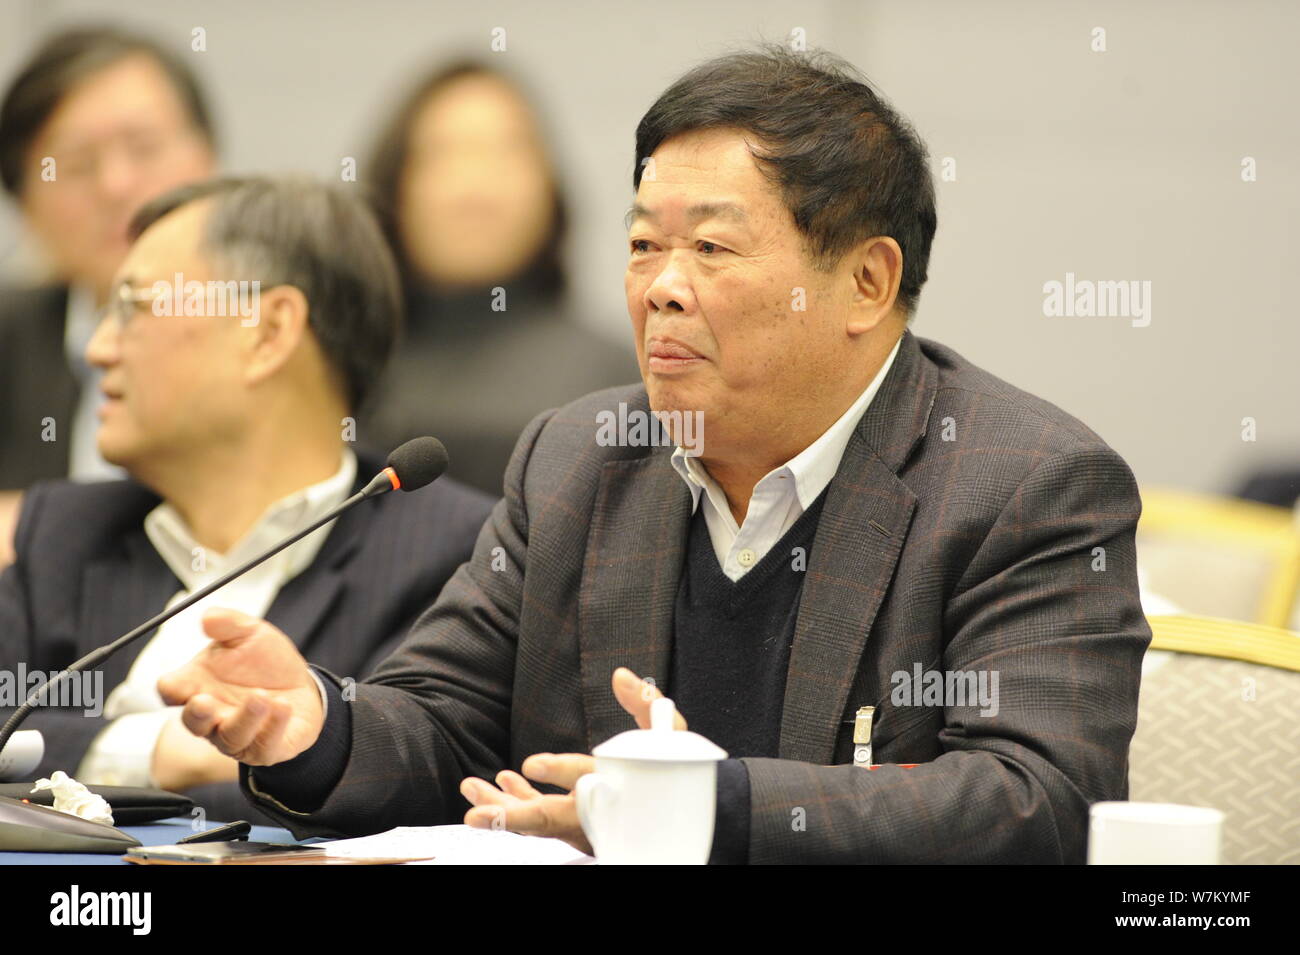 --FILE--Cho Tak Wong (Cao Dewang), Chairman of Fuyao Group and Chairman of Fuyao Glass Industry Group Co., attends a panel discussion during the Third Stock Photo